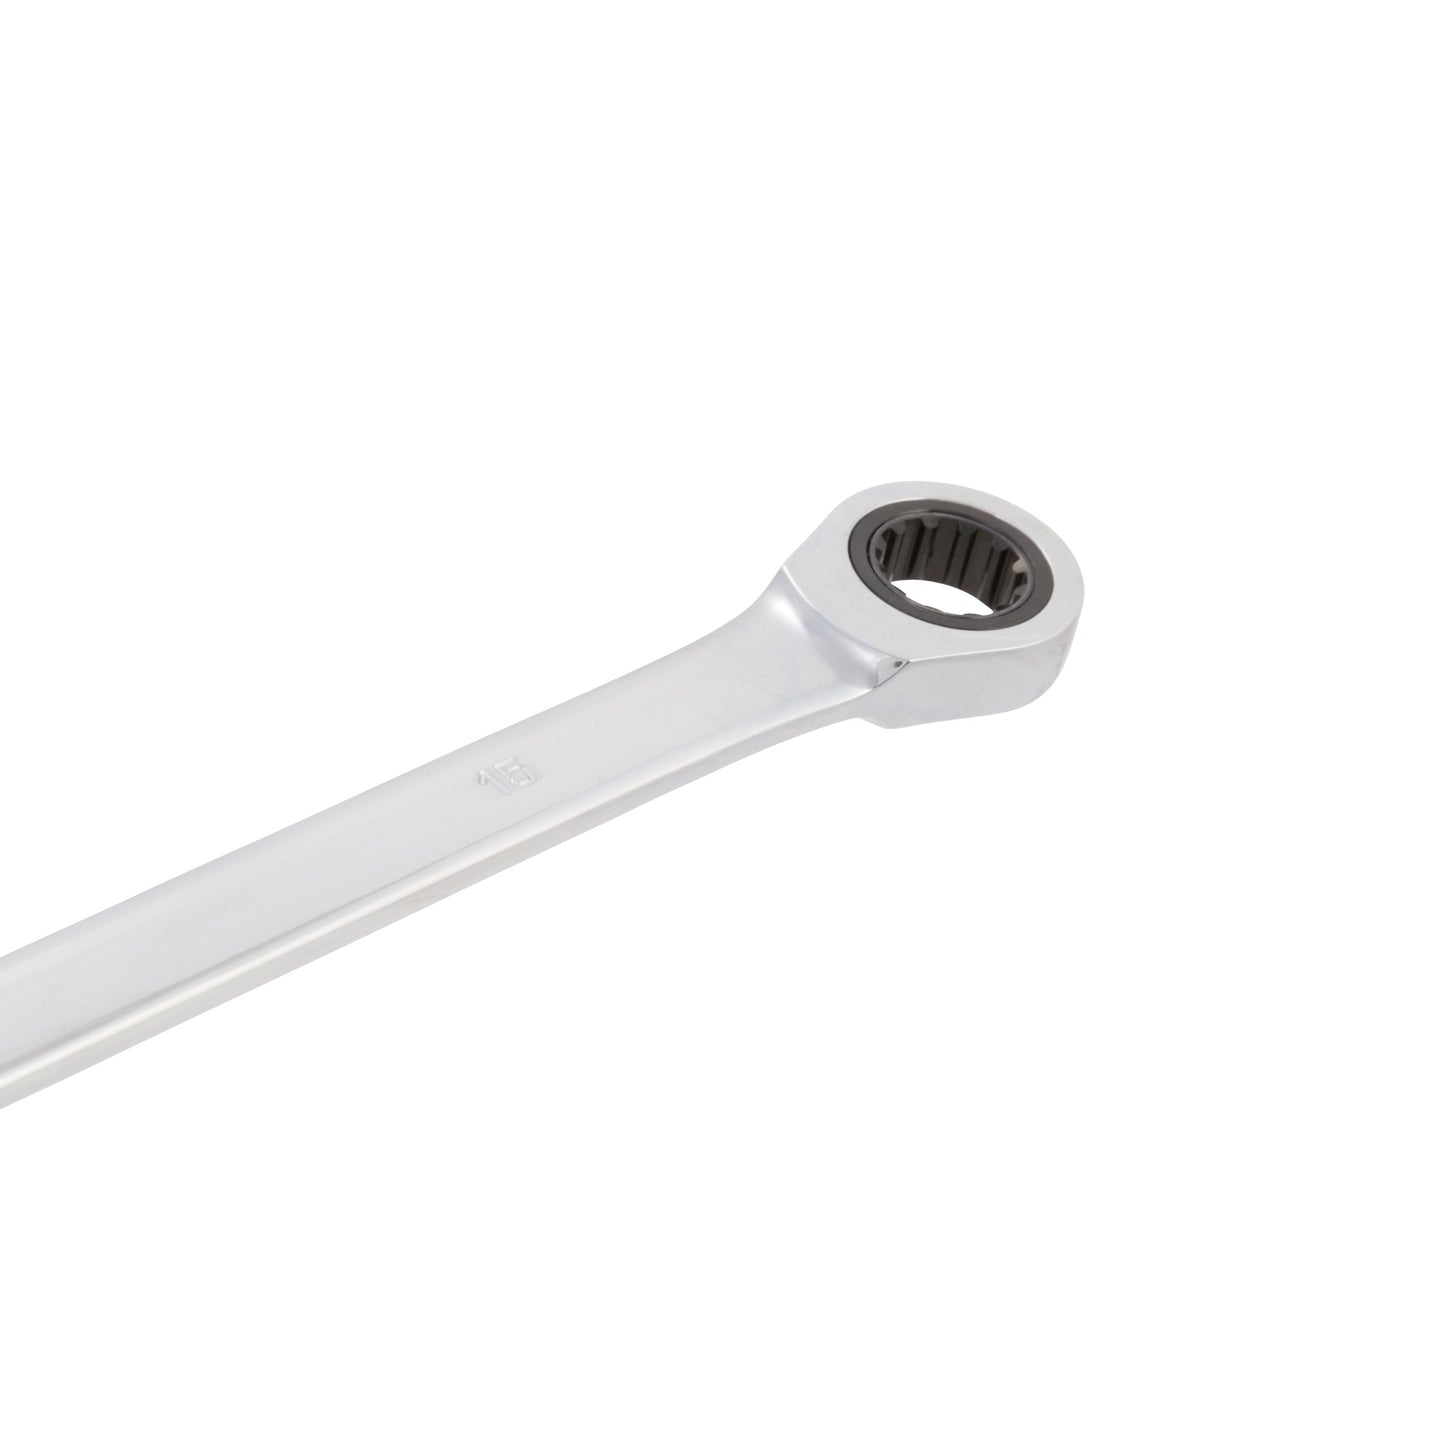 14mm x 15mm Double Box-End Universal Spline Extra Long Ratcheting Wrench